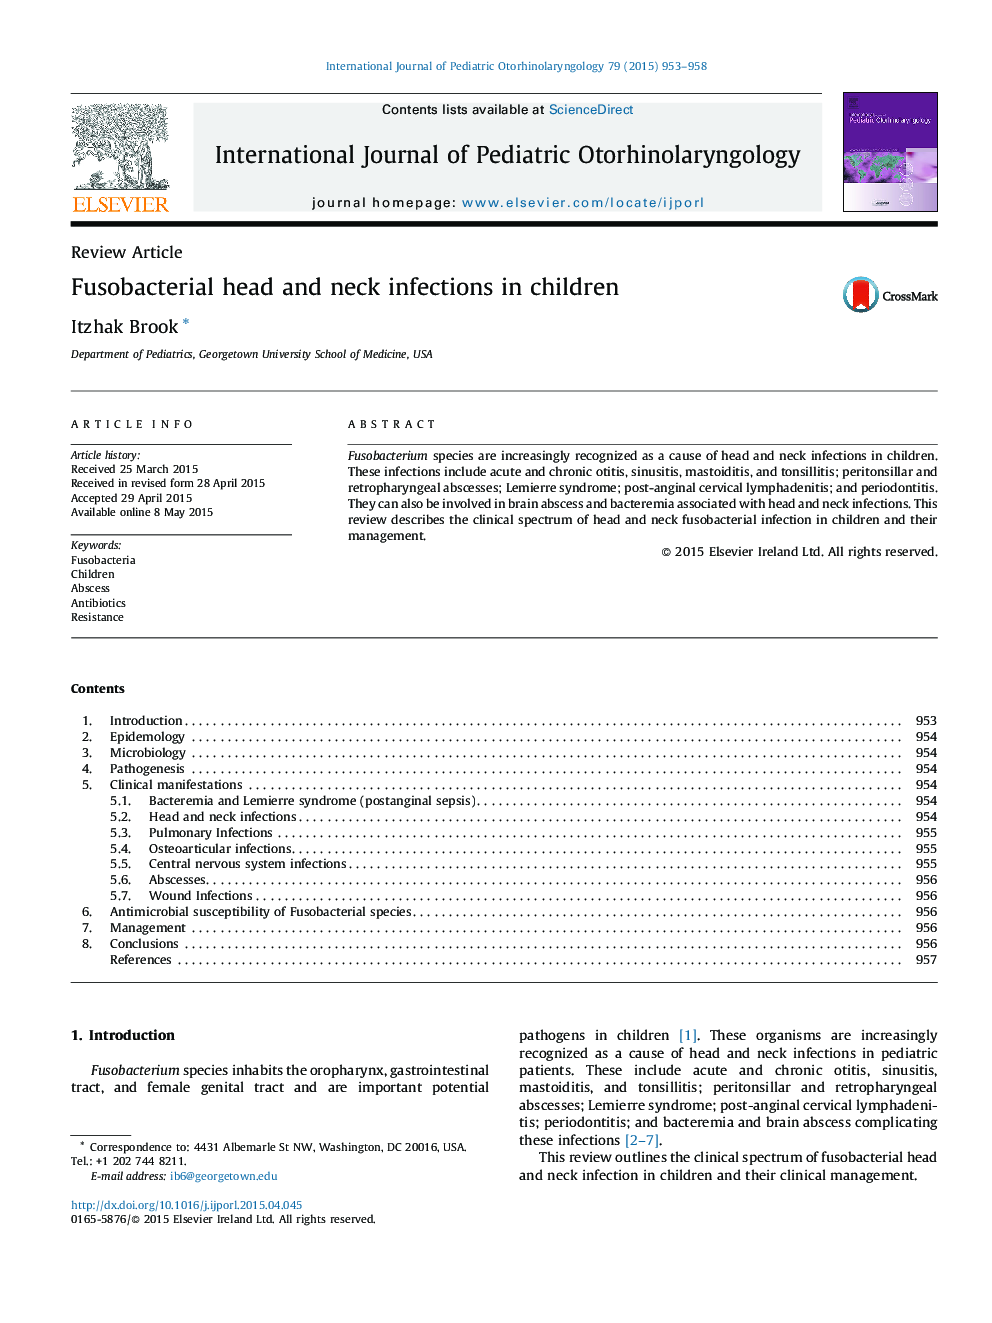 Fusobacterial head and neck infections in children